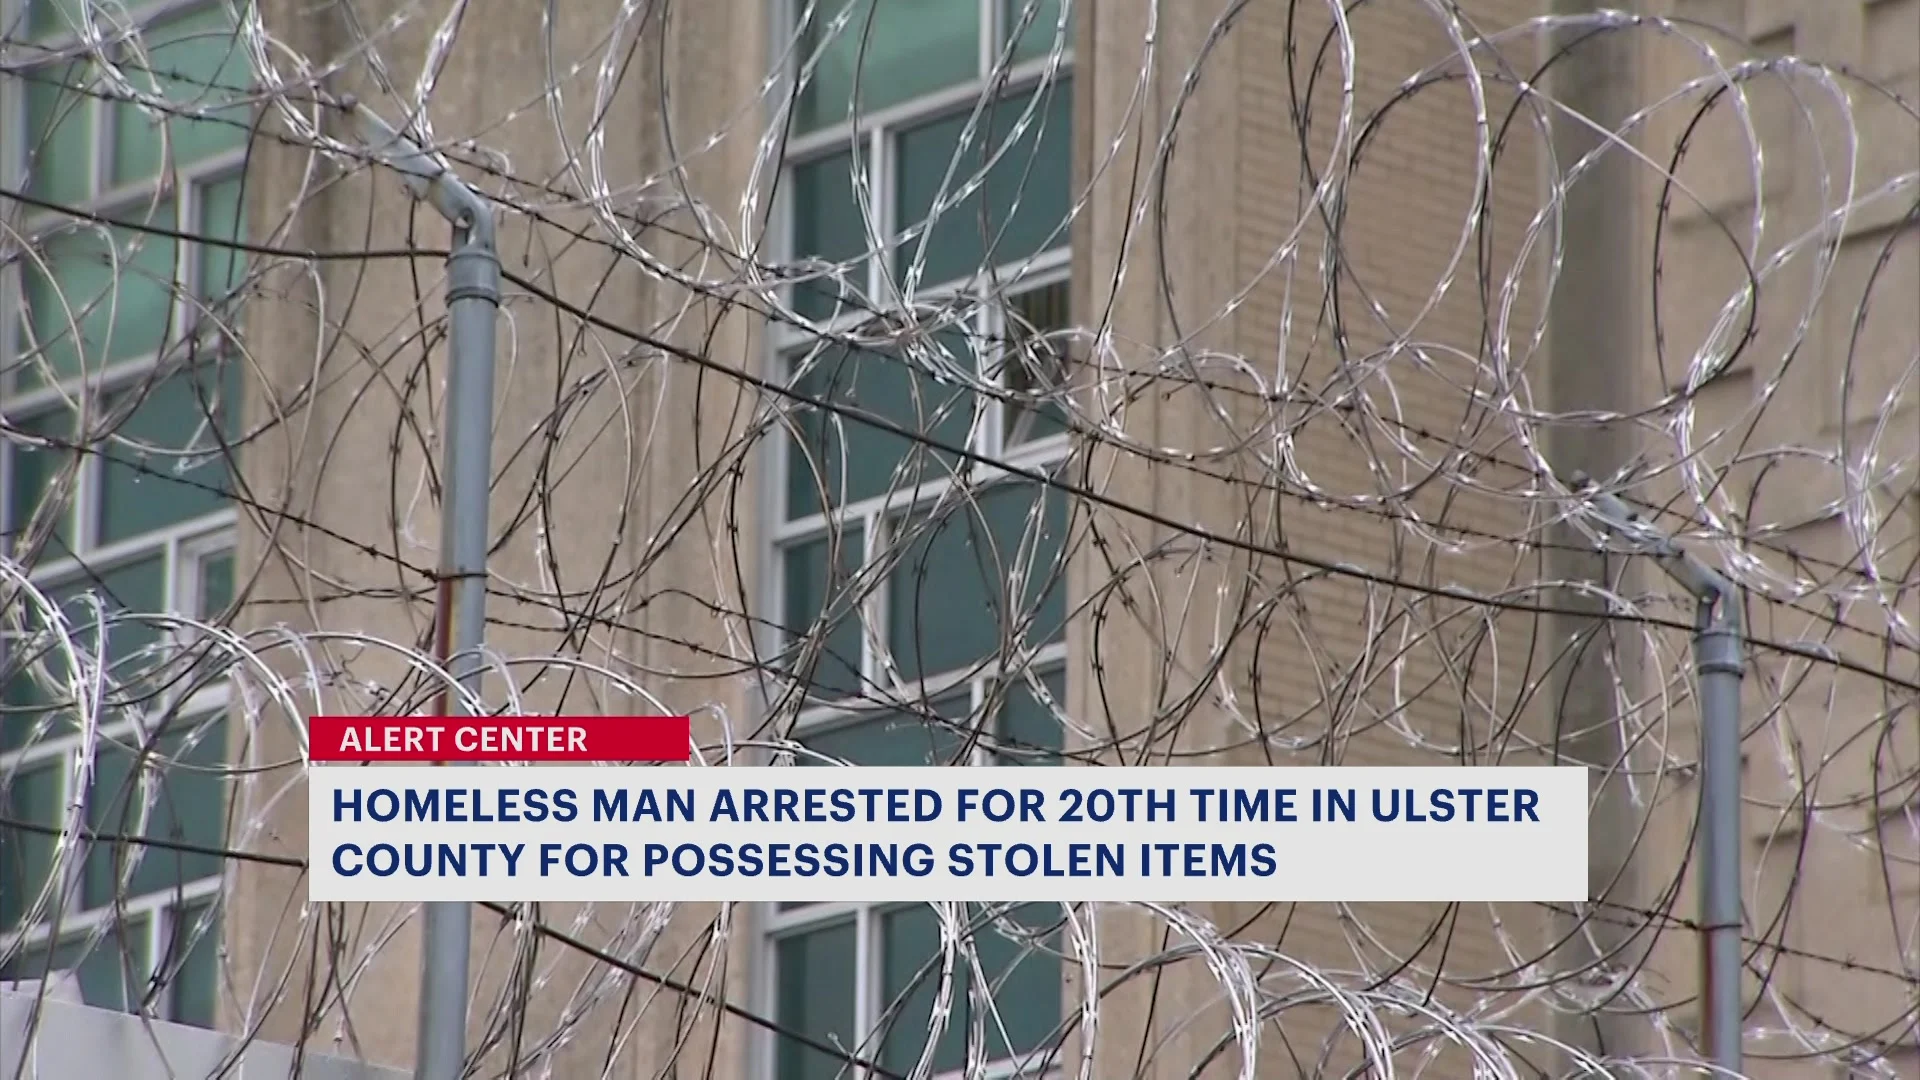 Homeless man arrested for 20th time in Ulster County for possessing stolen items